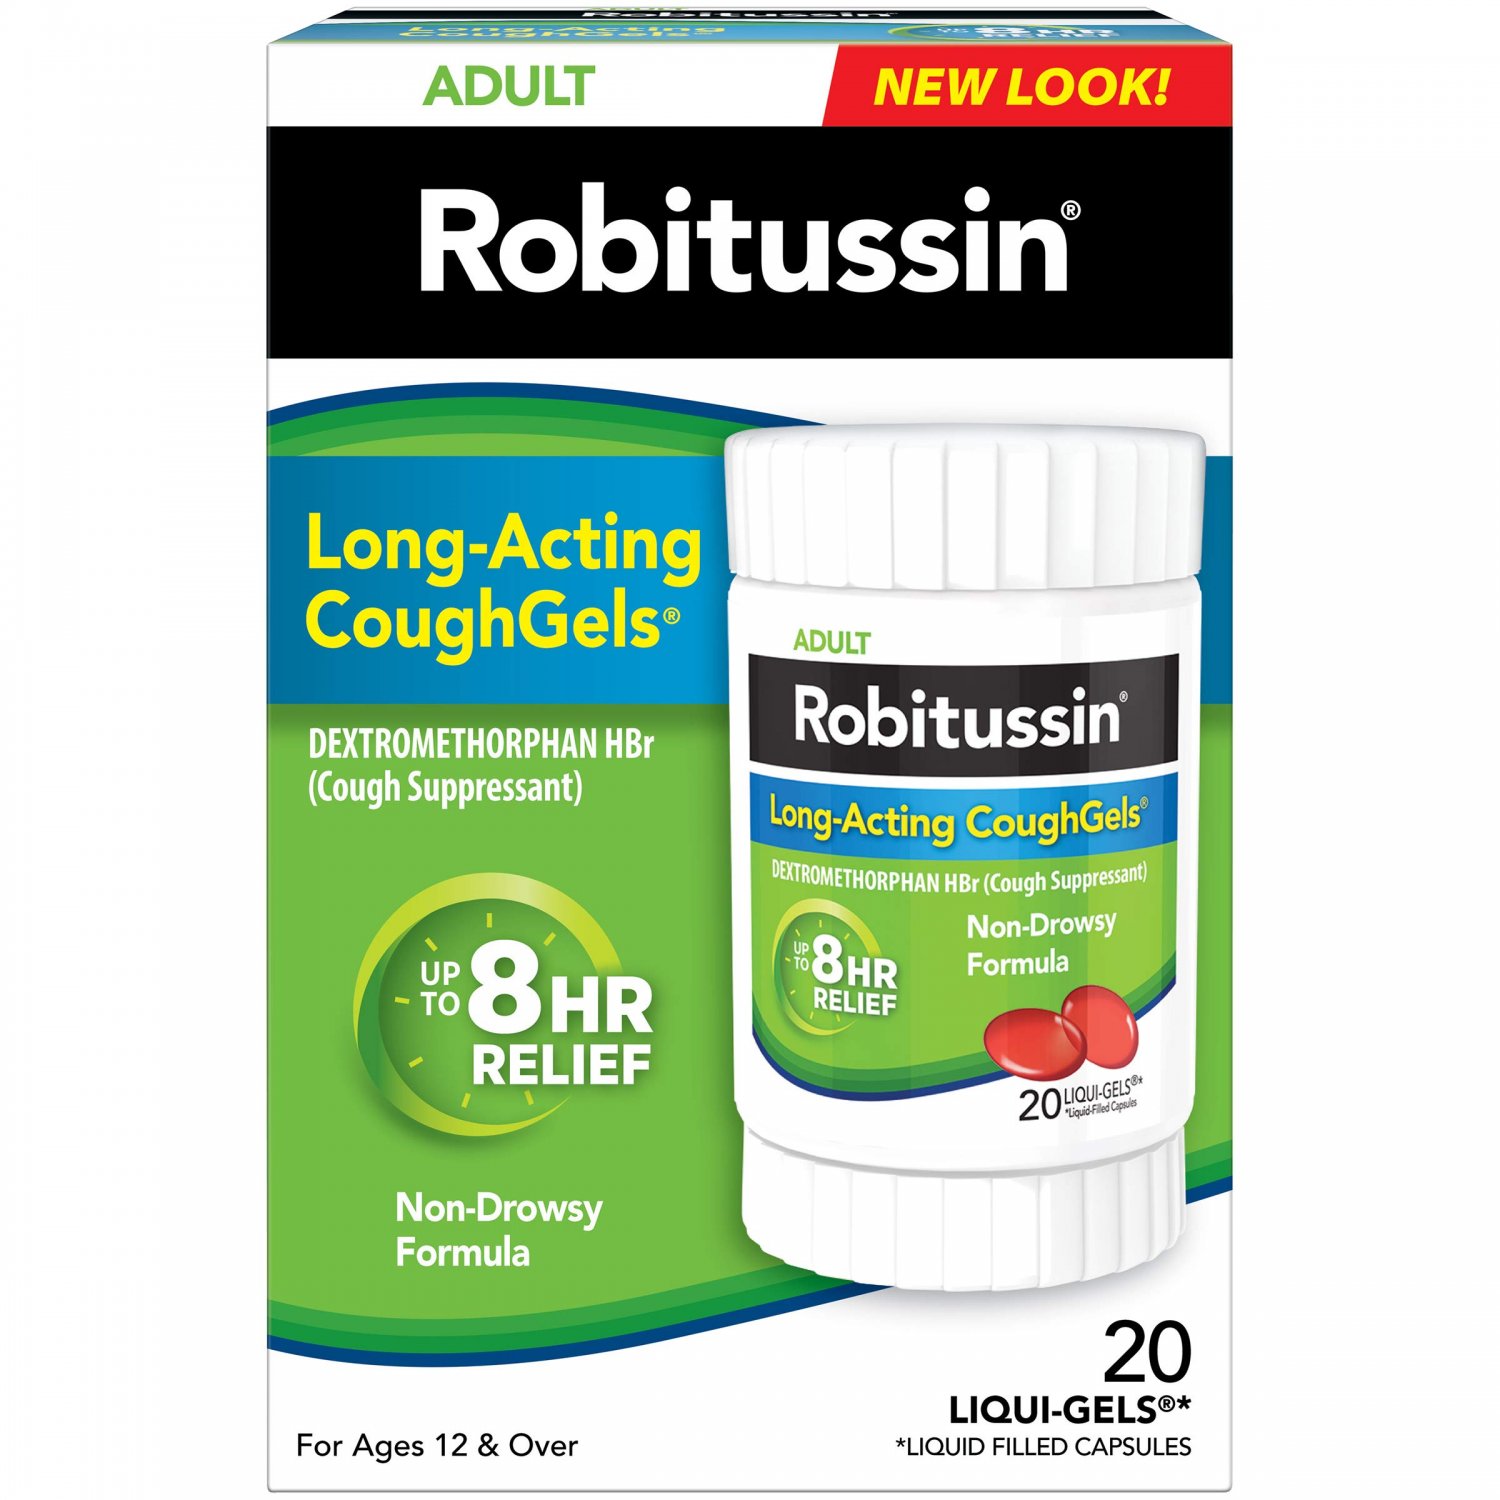 Robitussin Adult LongActing CoughGels (20 Count), 8Hour NonDrowsy